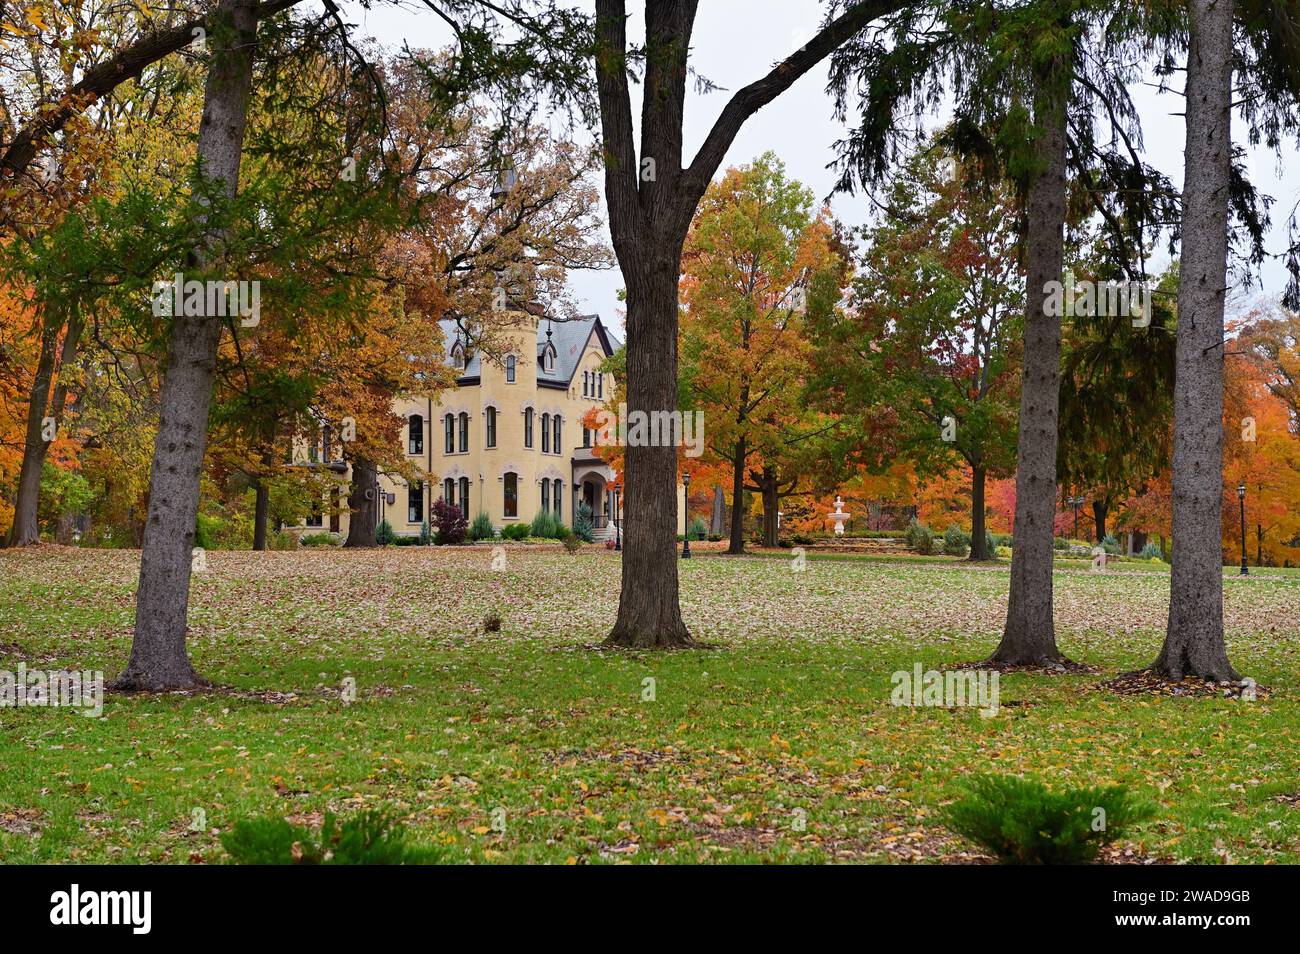 Wayne, Illinois, USA: A large country estate on a wooded parcel of land reveals the colors and feel of autumn. Stock Photo